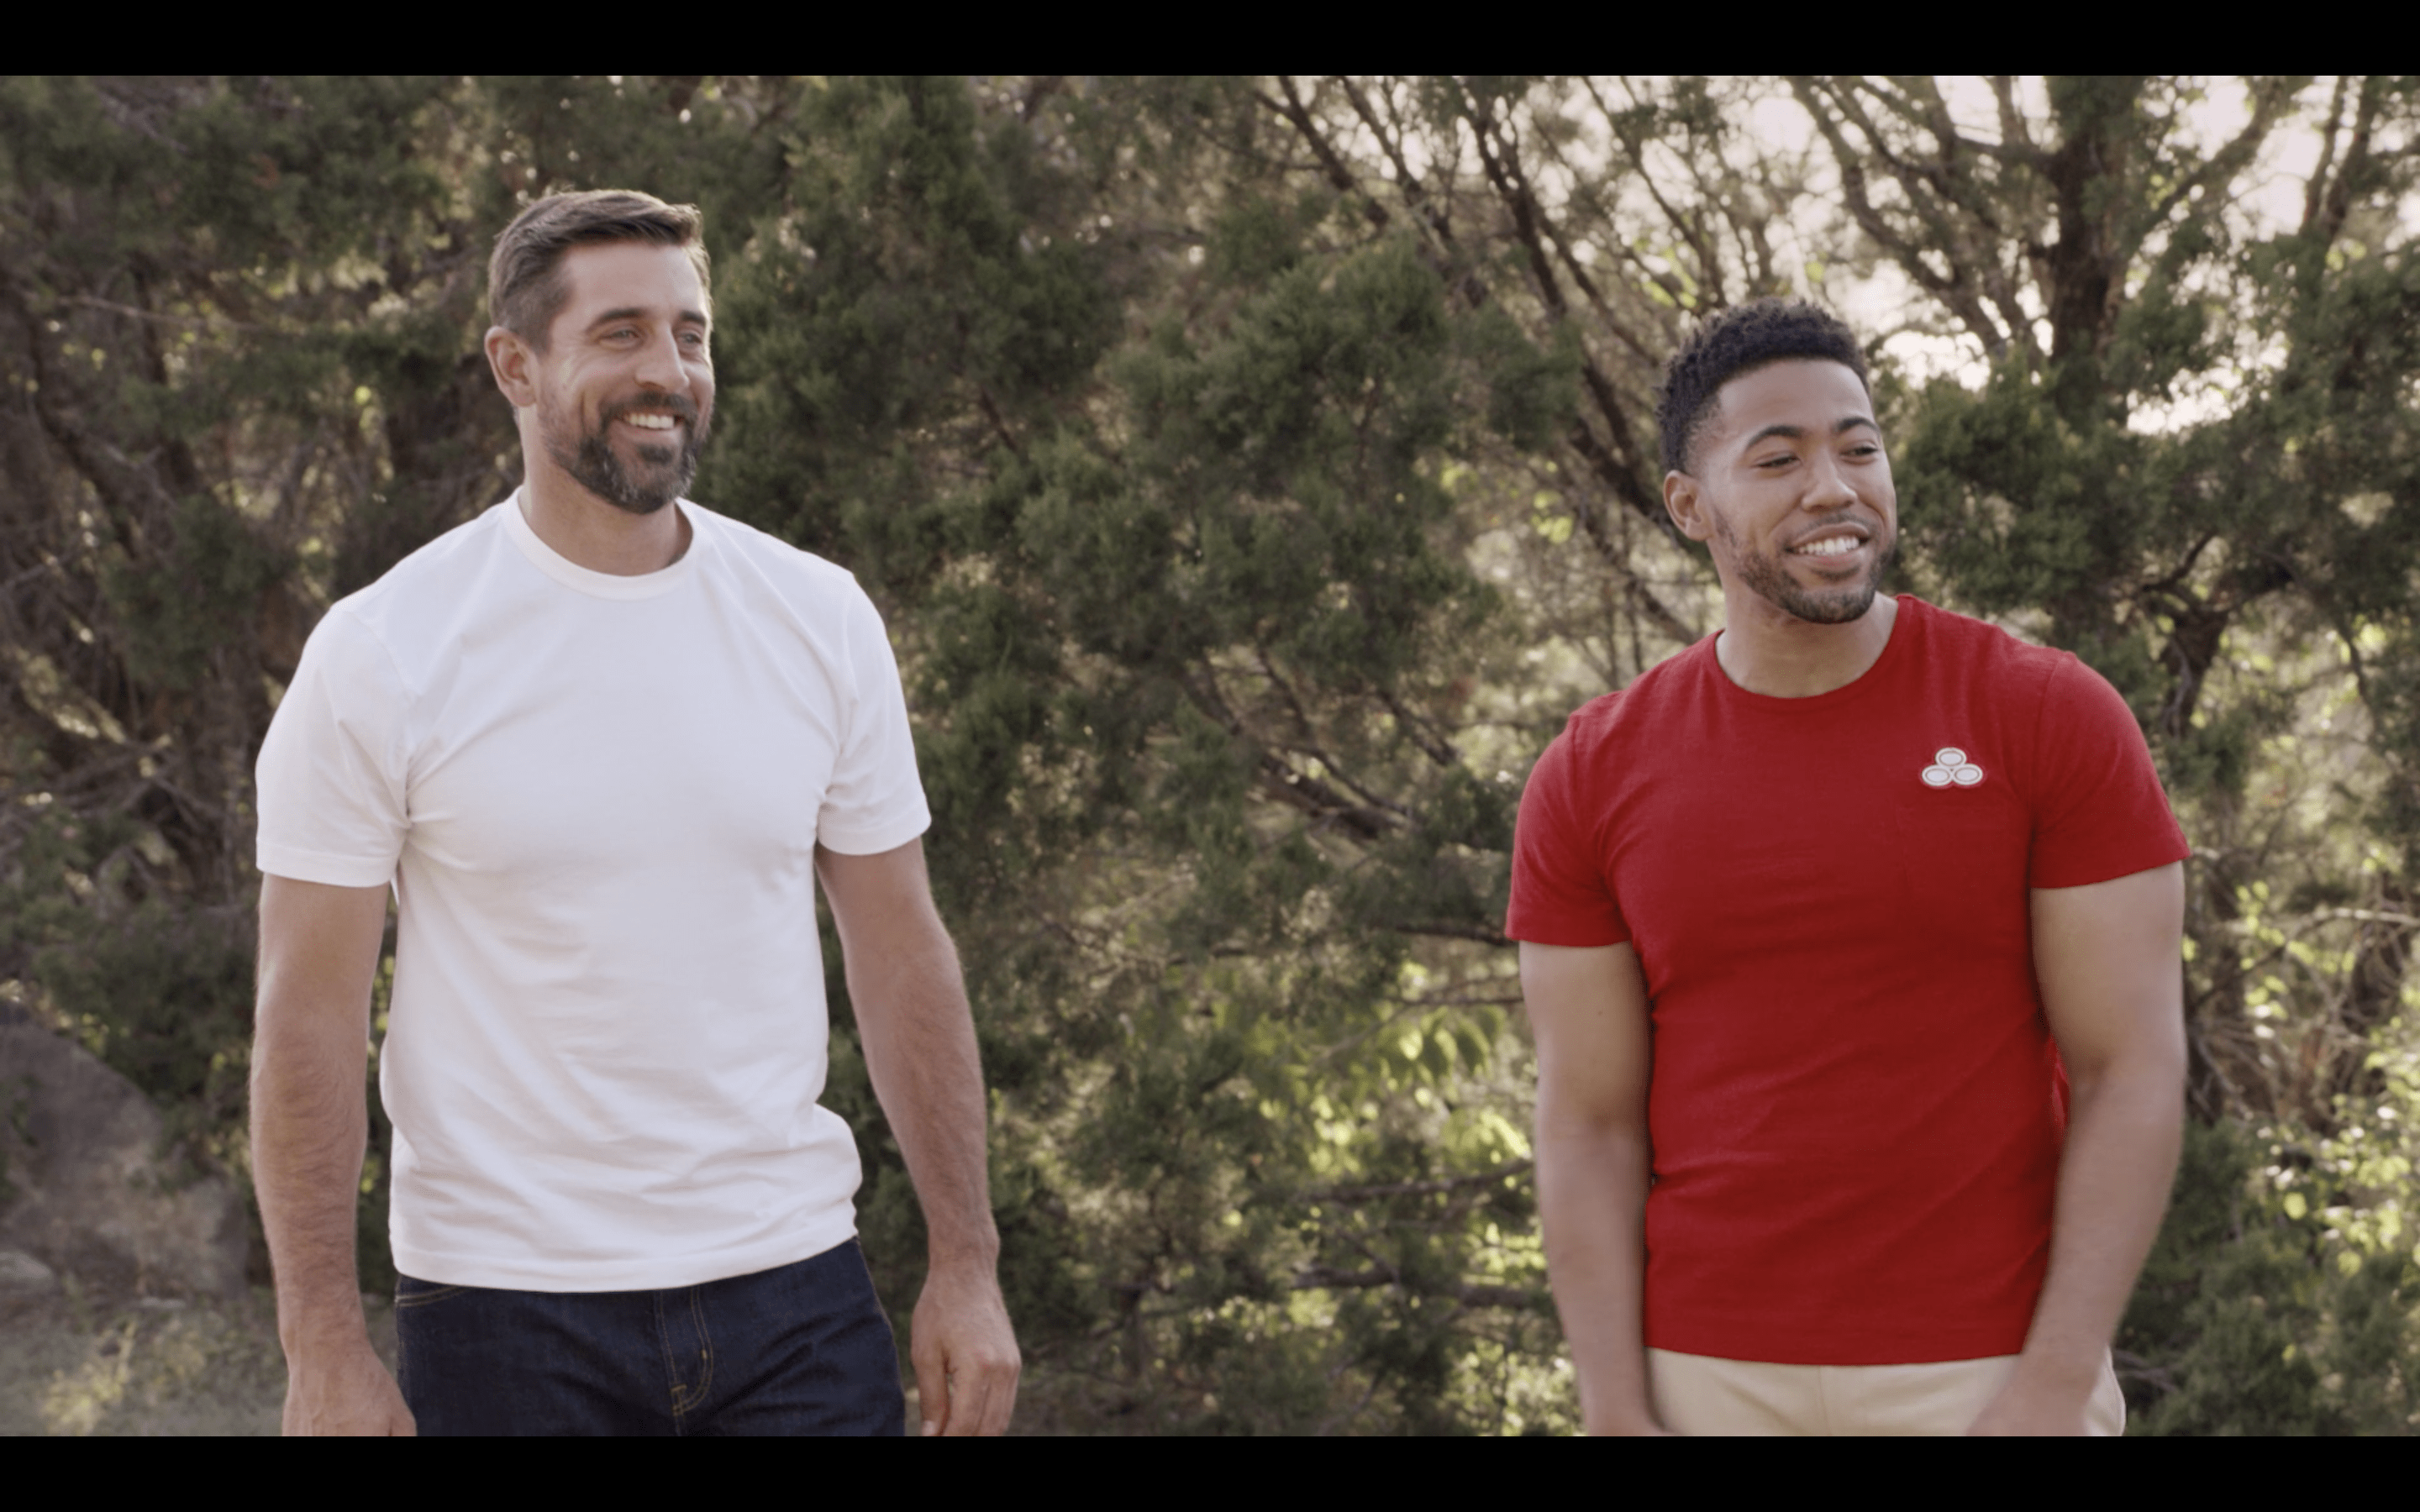 State Farm Reduces Number Of Spots Featuring Aaron Rodgers | Barrett Media